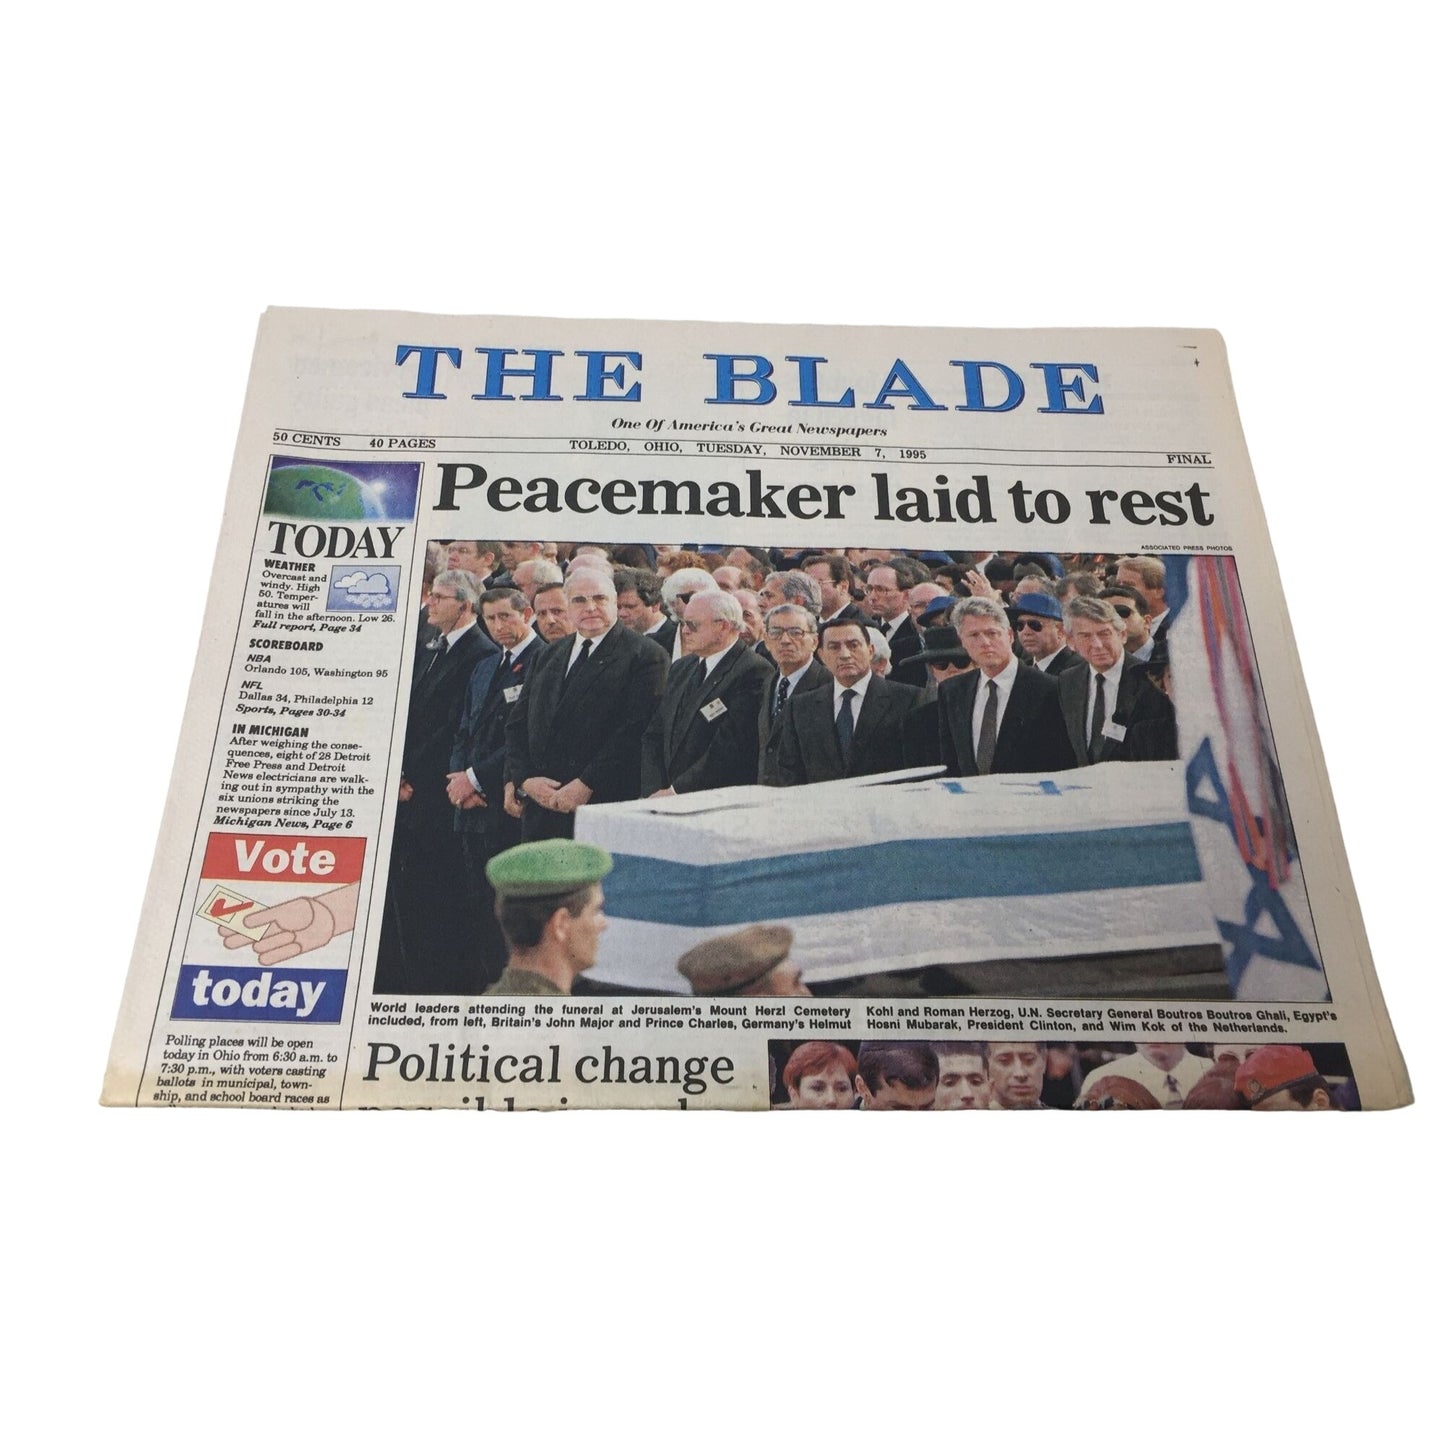 Vintage Collectible Newspaper "The Blade" November 7, 1995